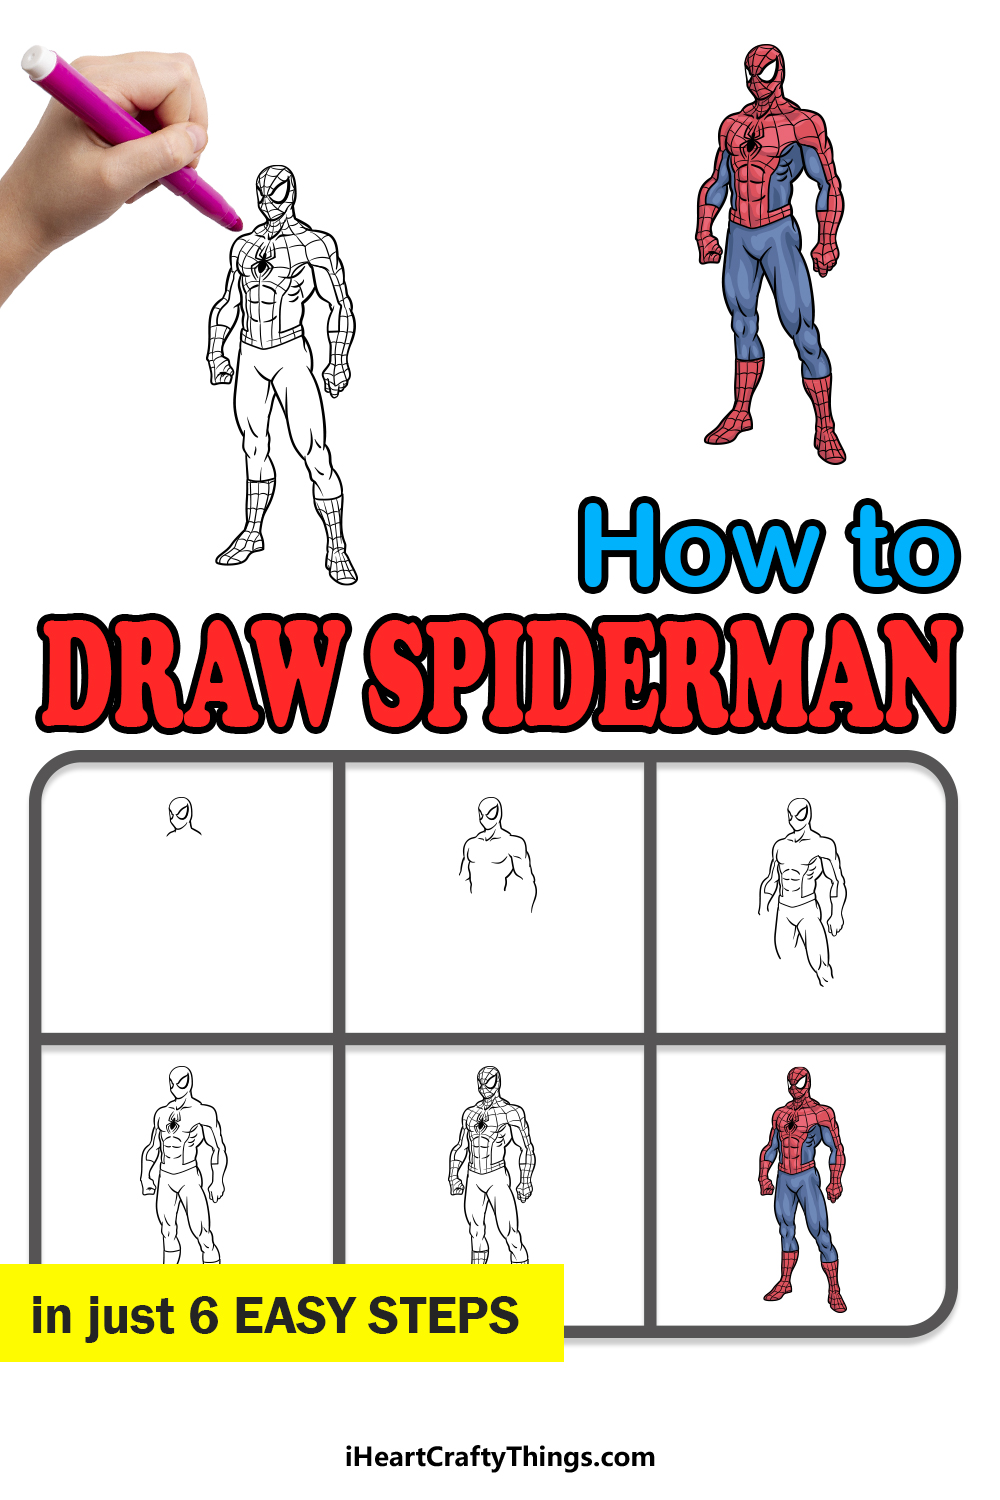 how to draw spiderman in 6 easy steps